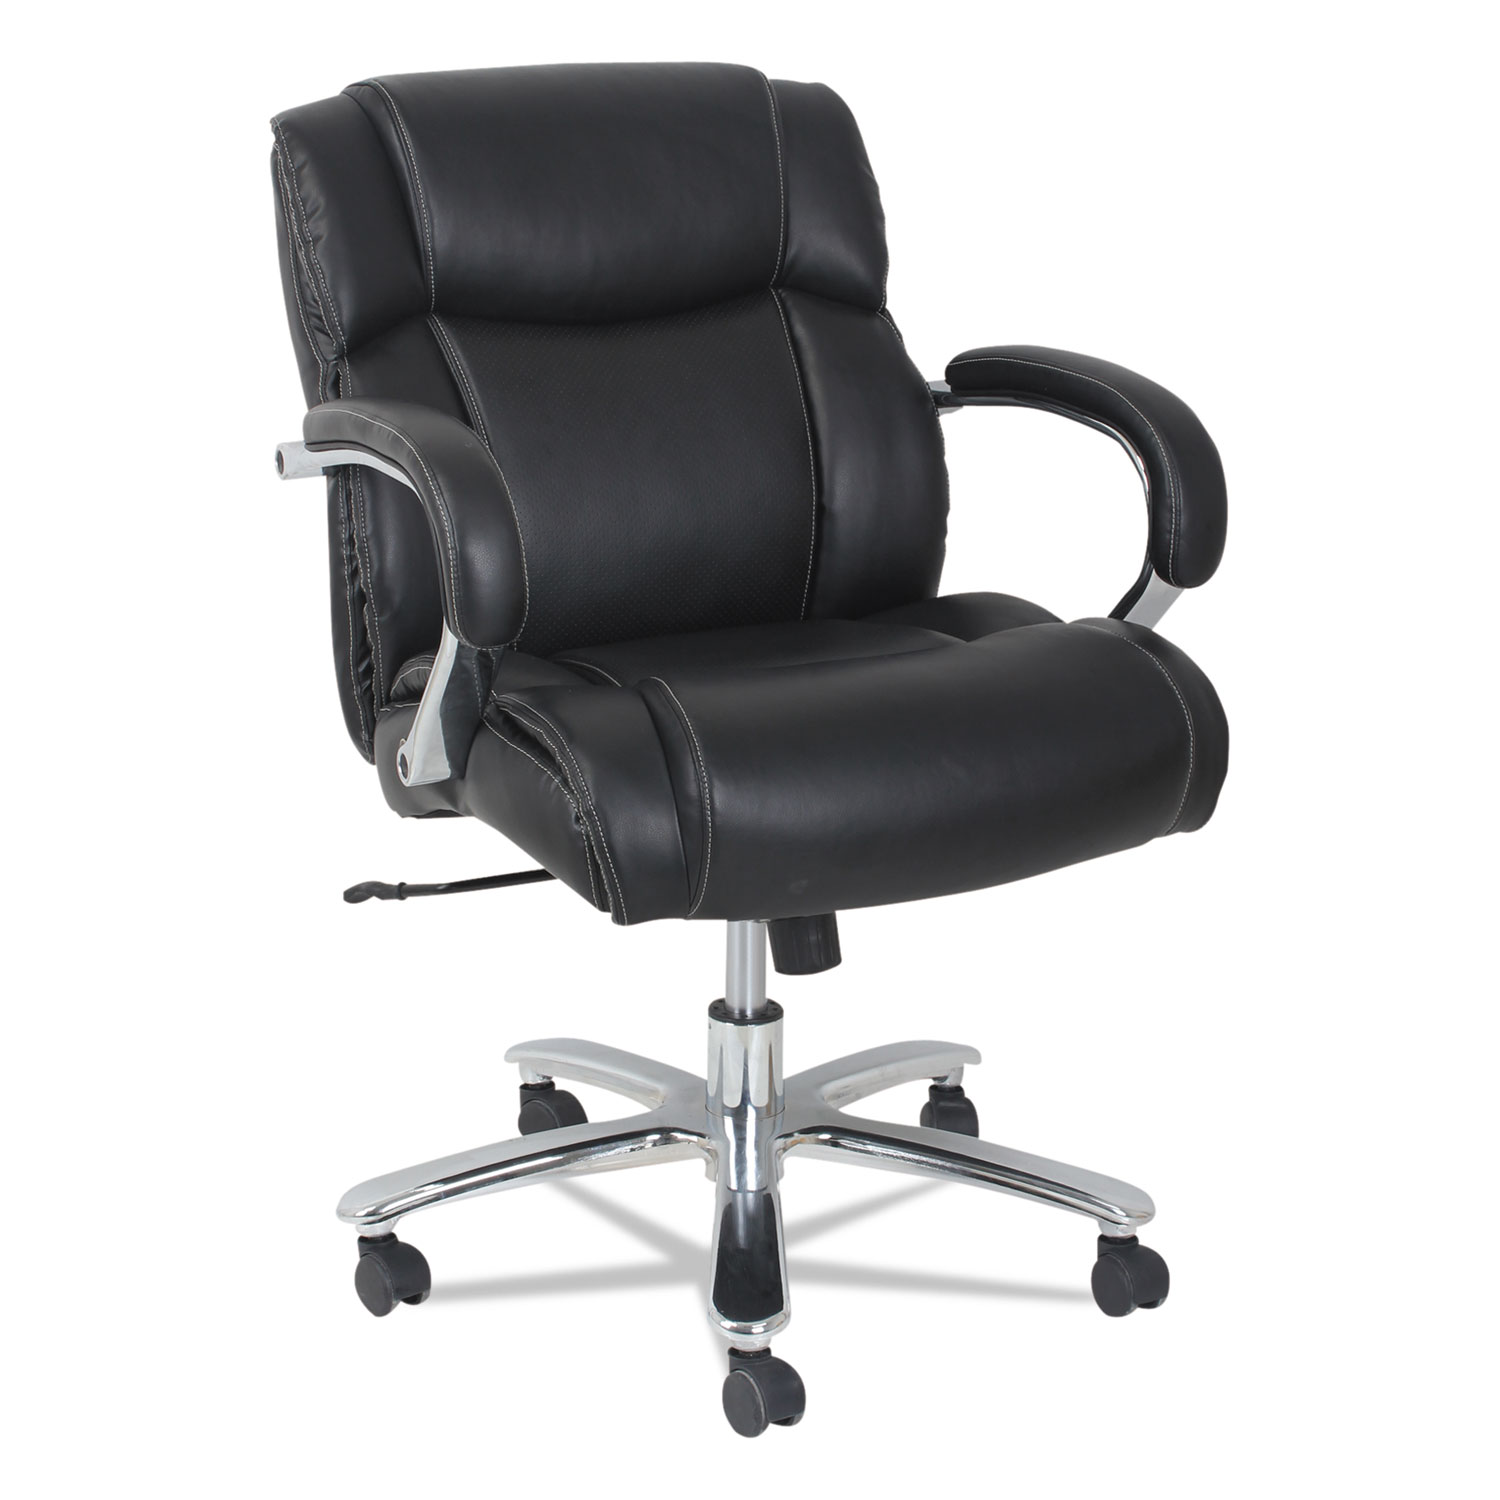  Alera ALEMS4619 Alera Maxxis Series Big and Tall Leather Chair, Supports up to 350 lbs., Black Seat/Black Back, Chrome Base (ALEMS4619) 